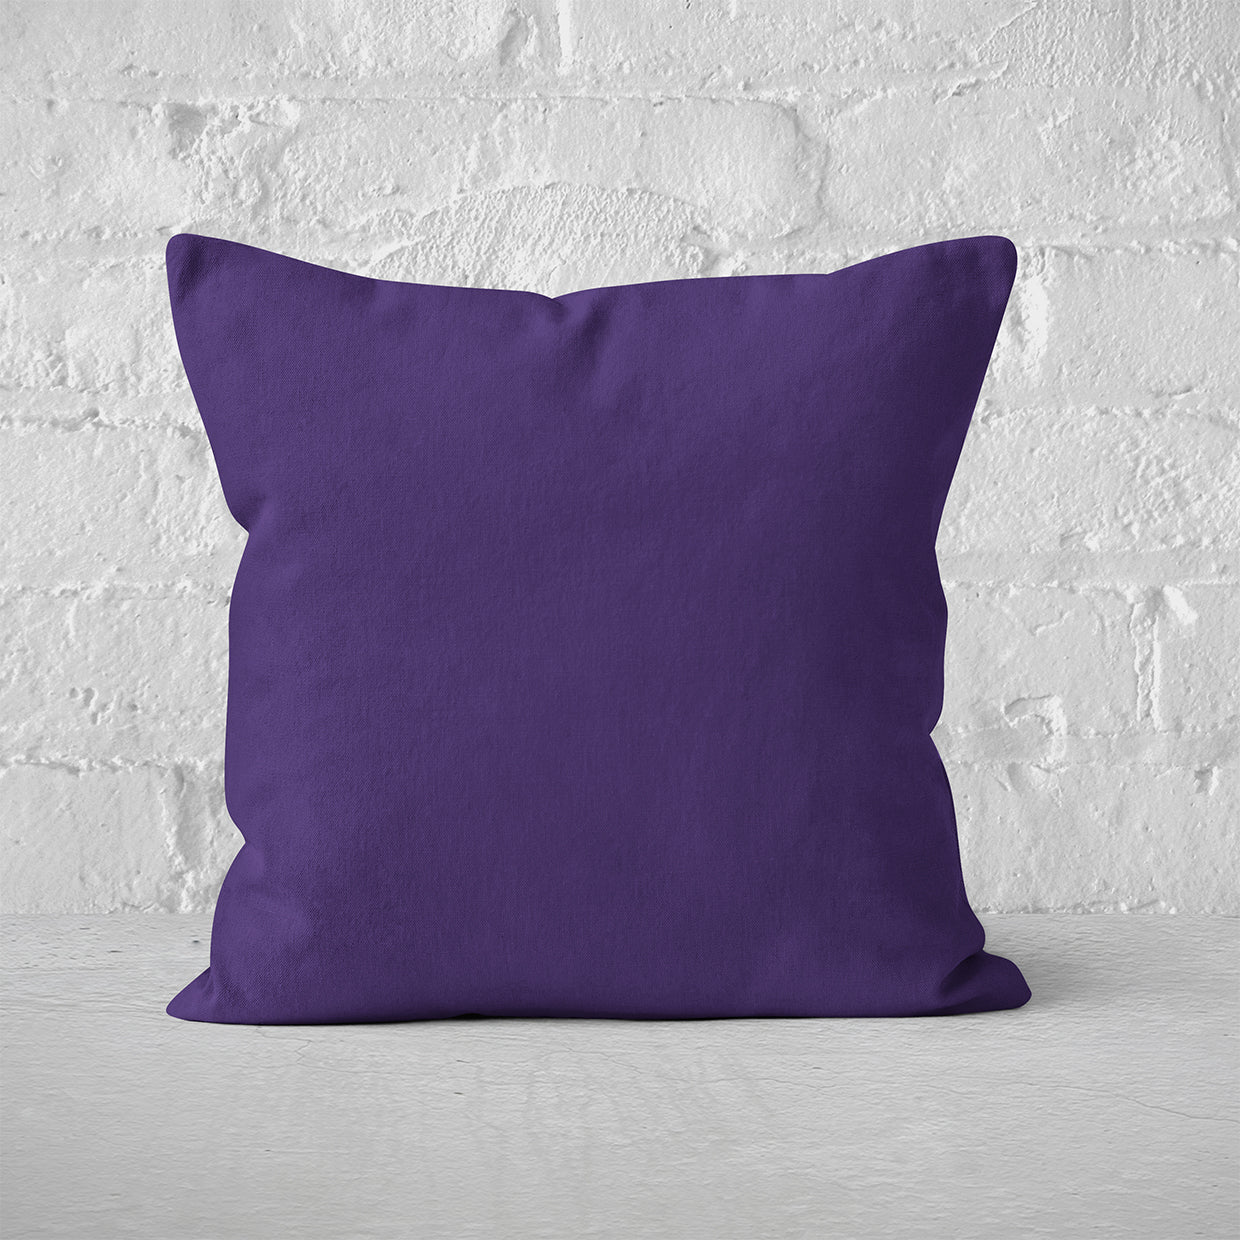 Pillow Cover Art Feature 'Solid' - Royal Purple - Cotton Twill